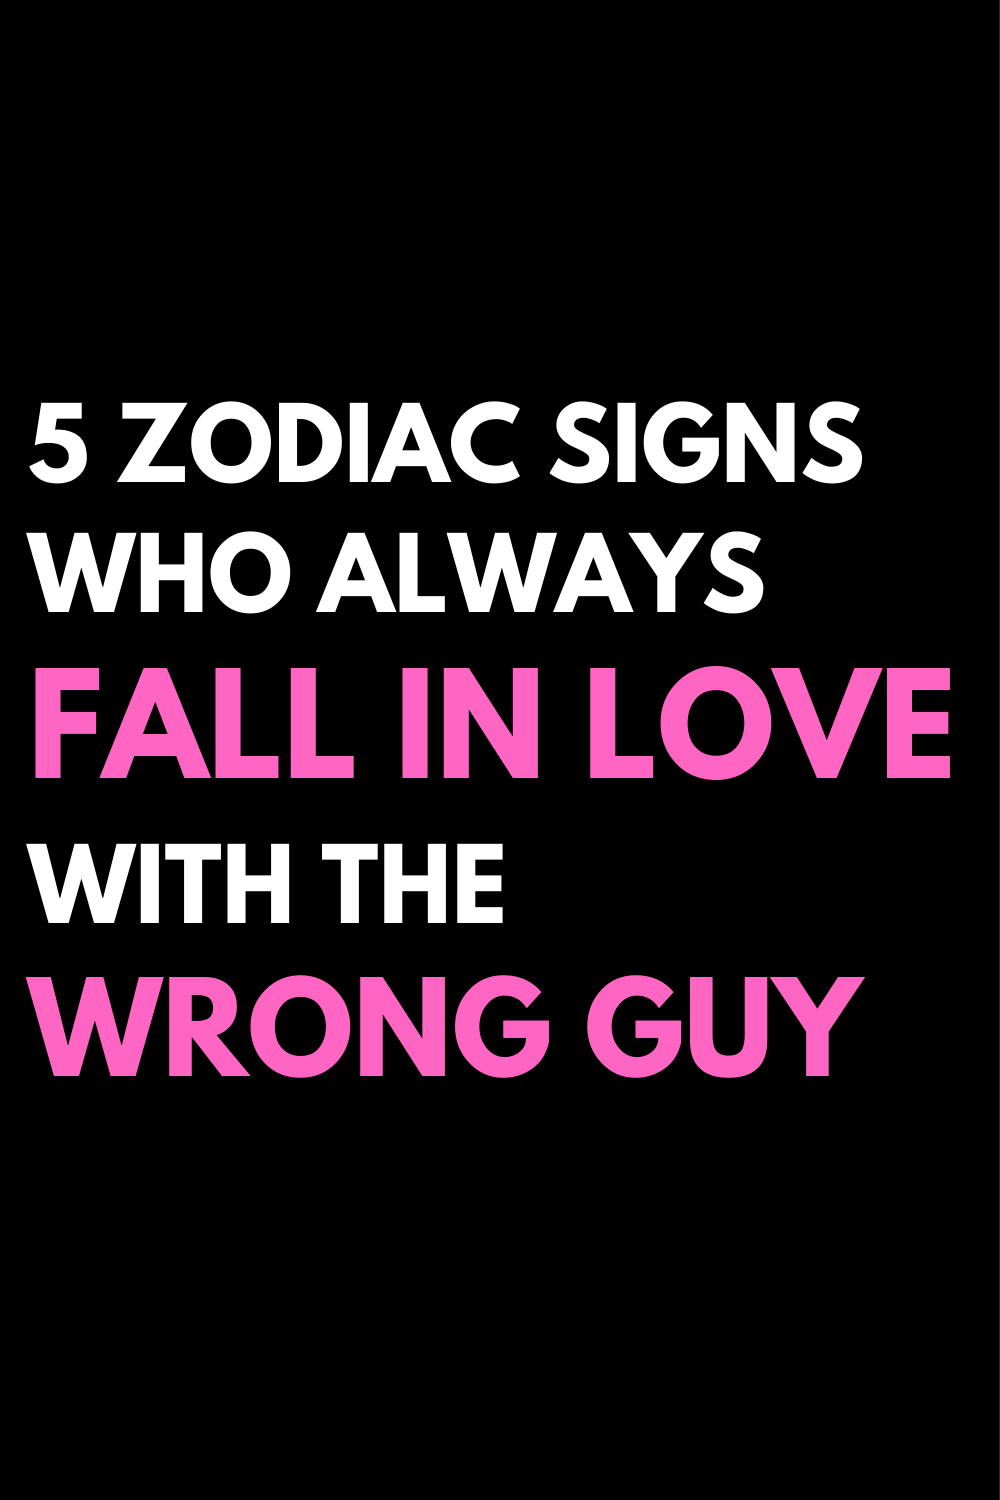 5 Zodiac Signs Who Always Fall In Love With The Wrong Guy